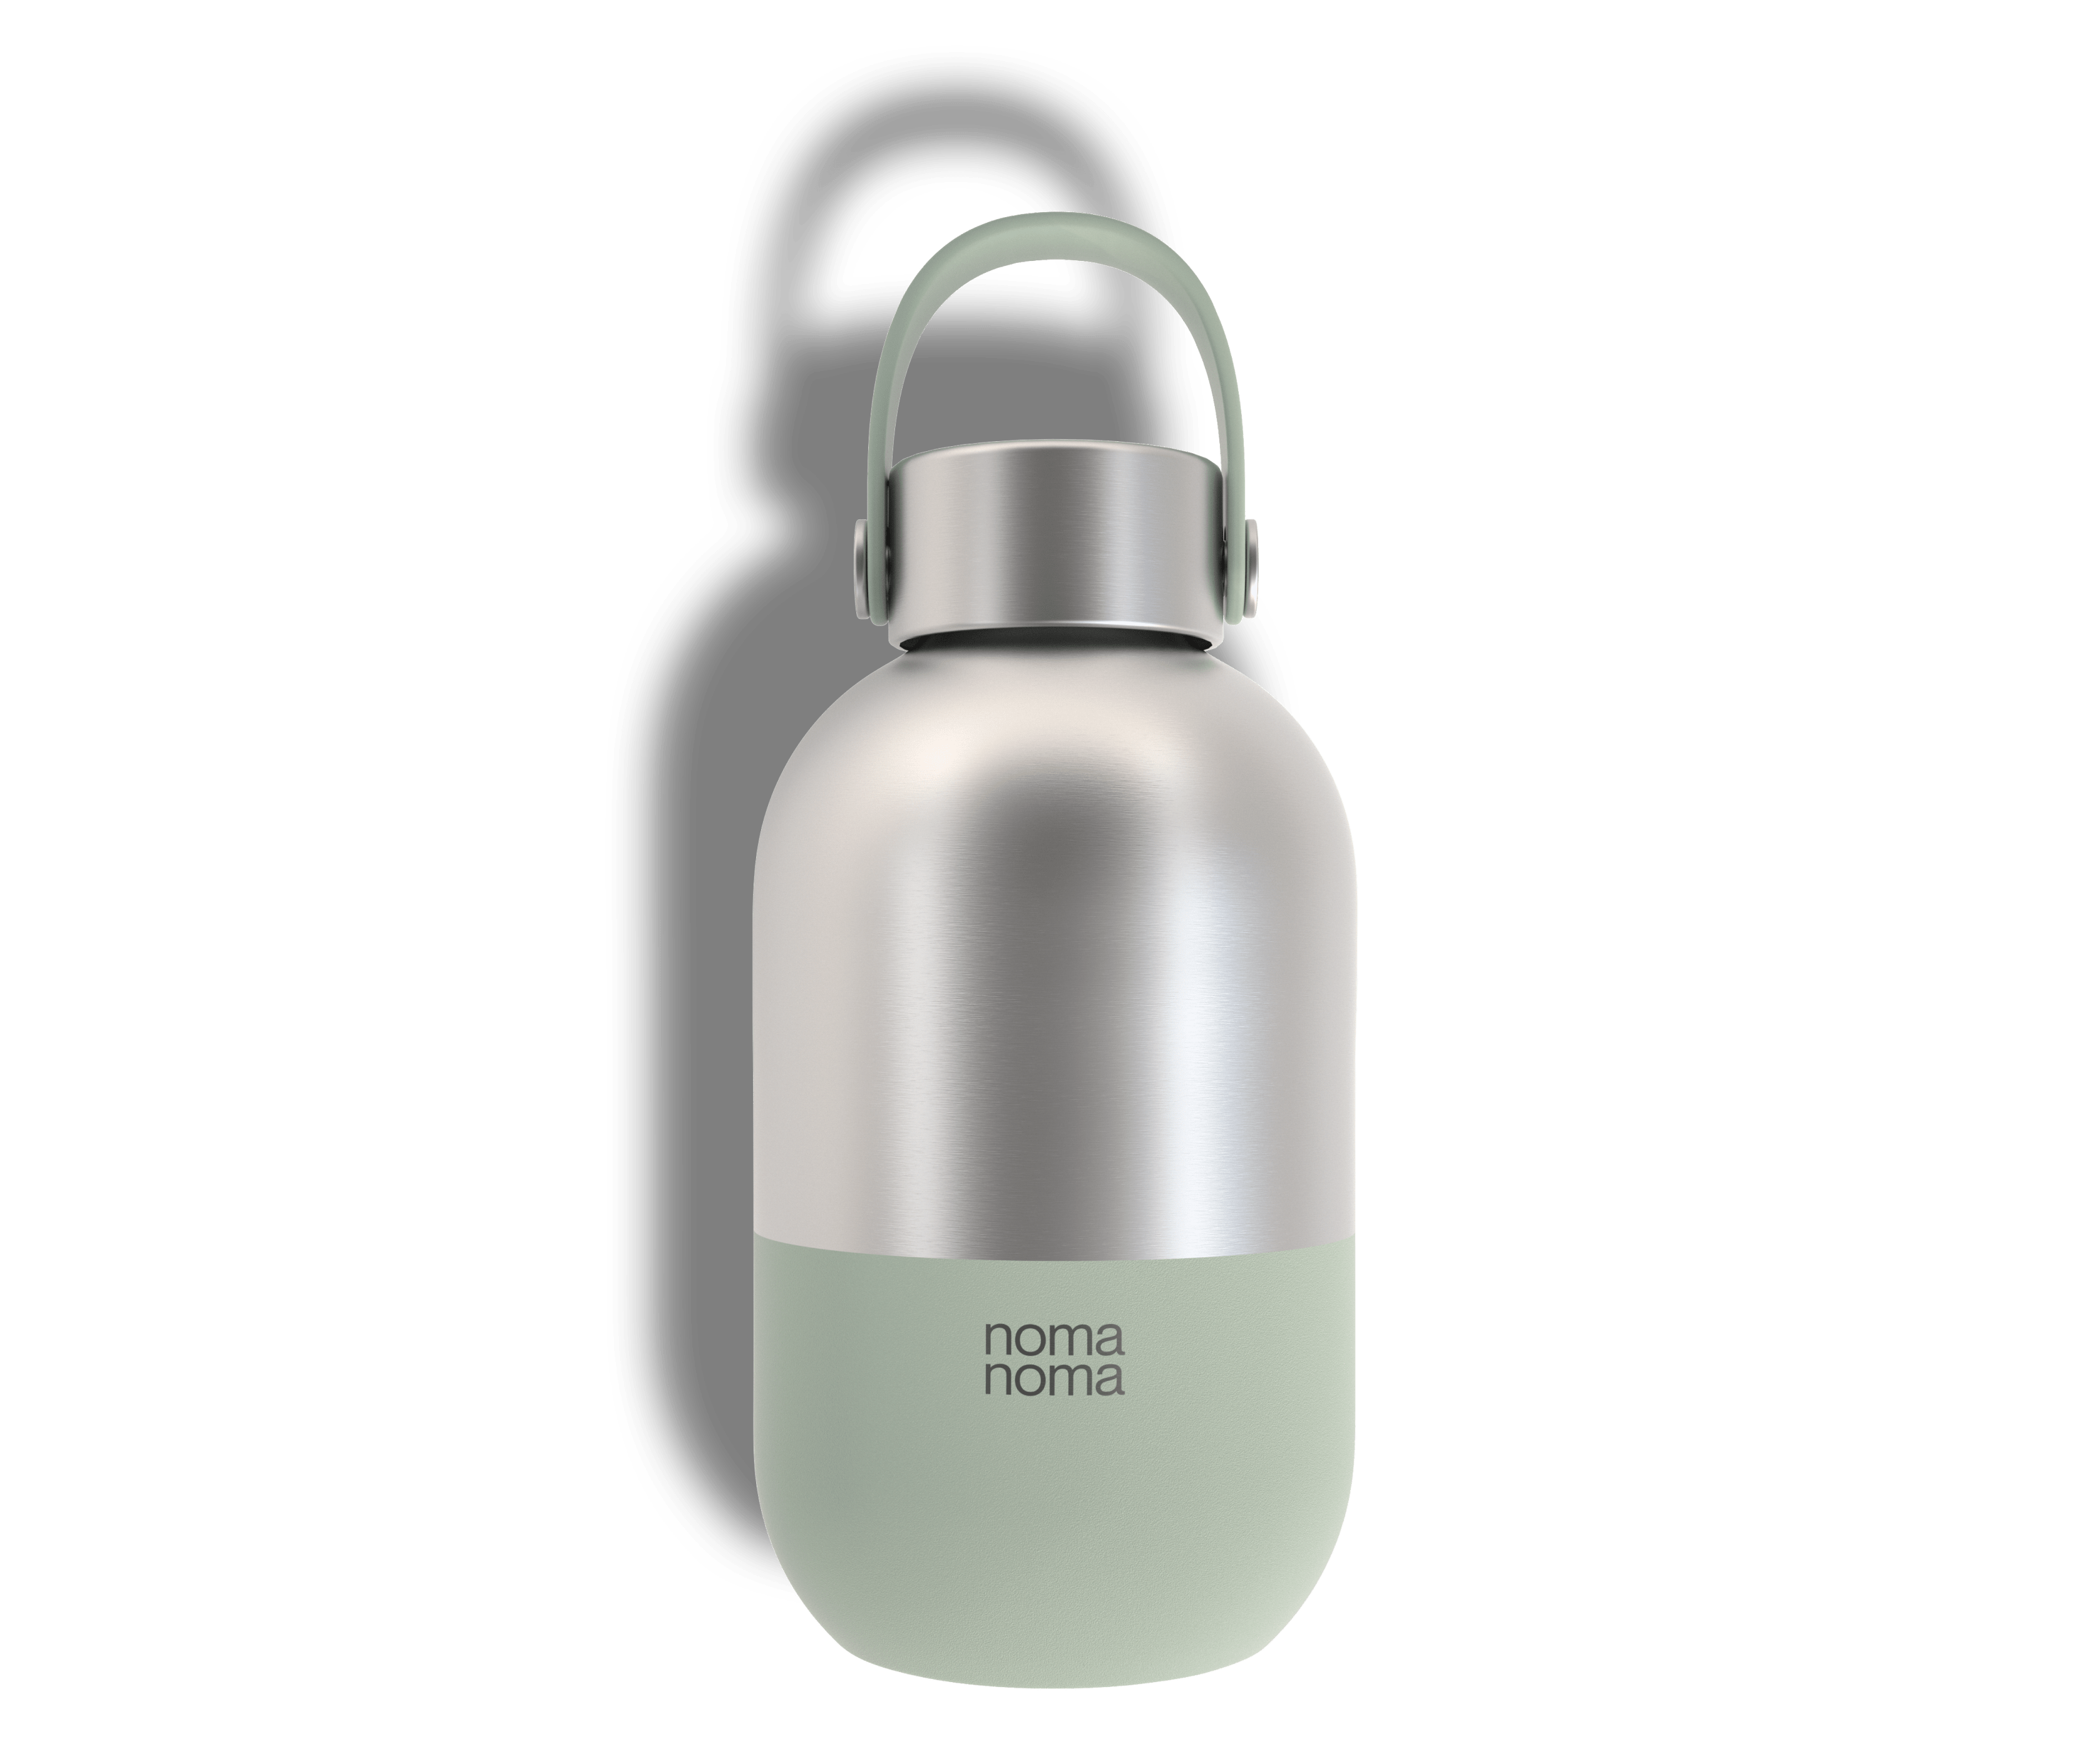 noma noma - your water bottle for hot and cool adventures